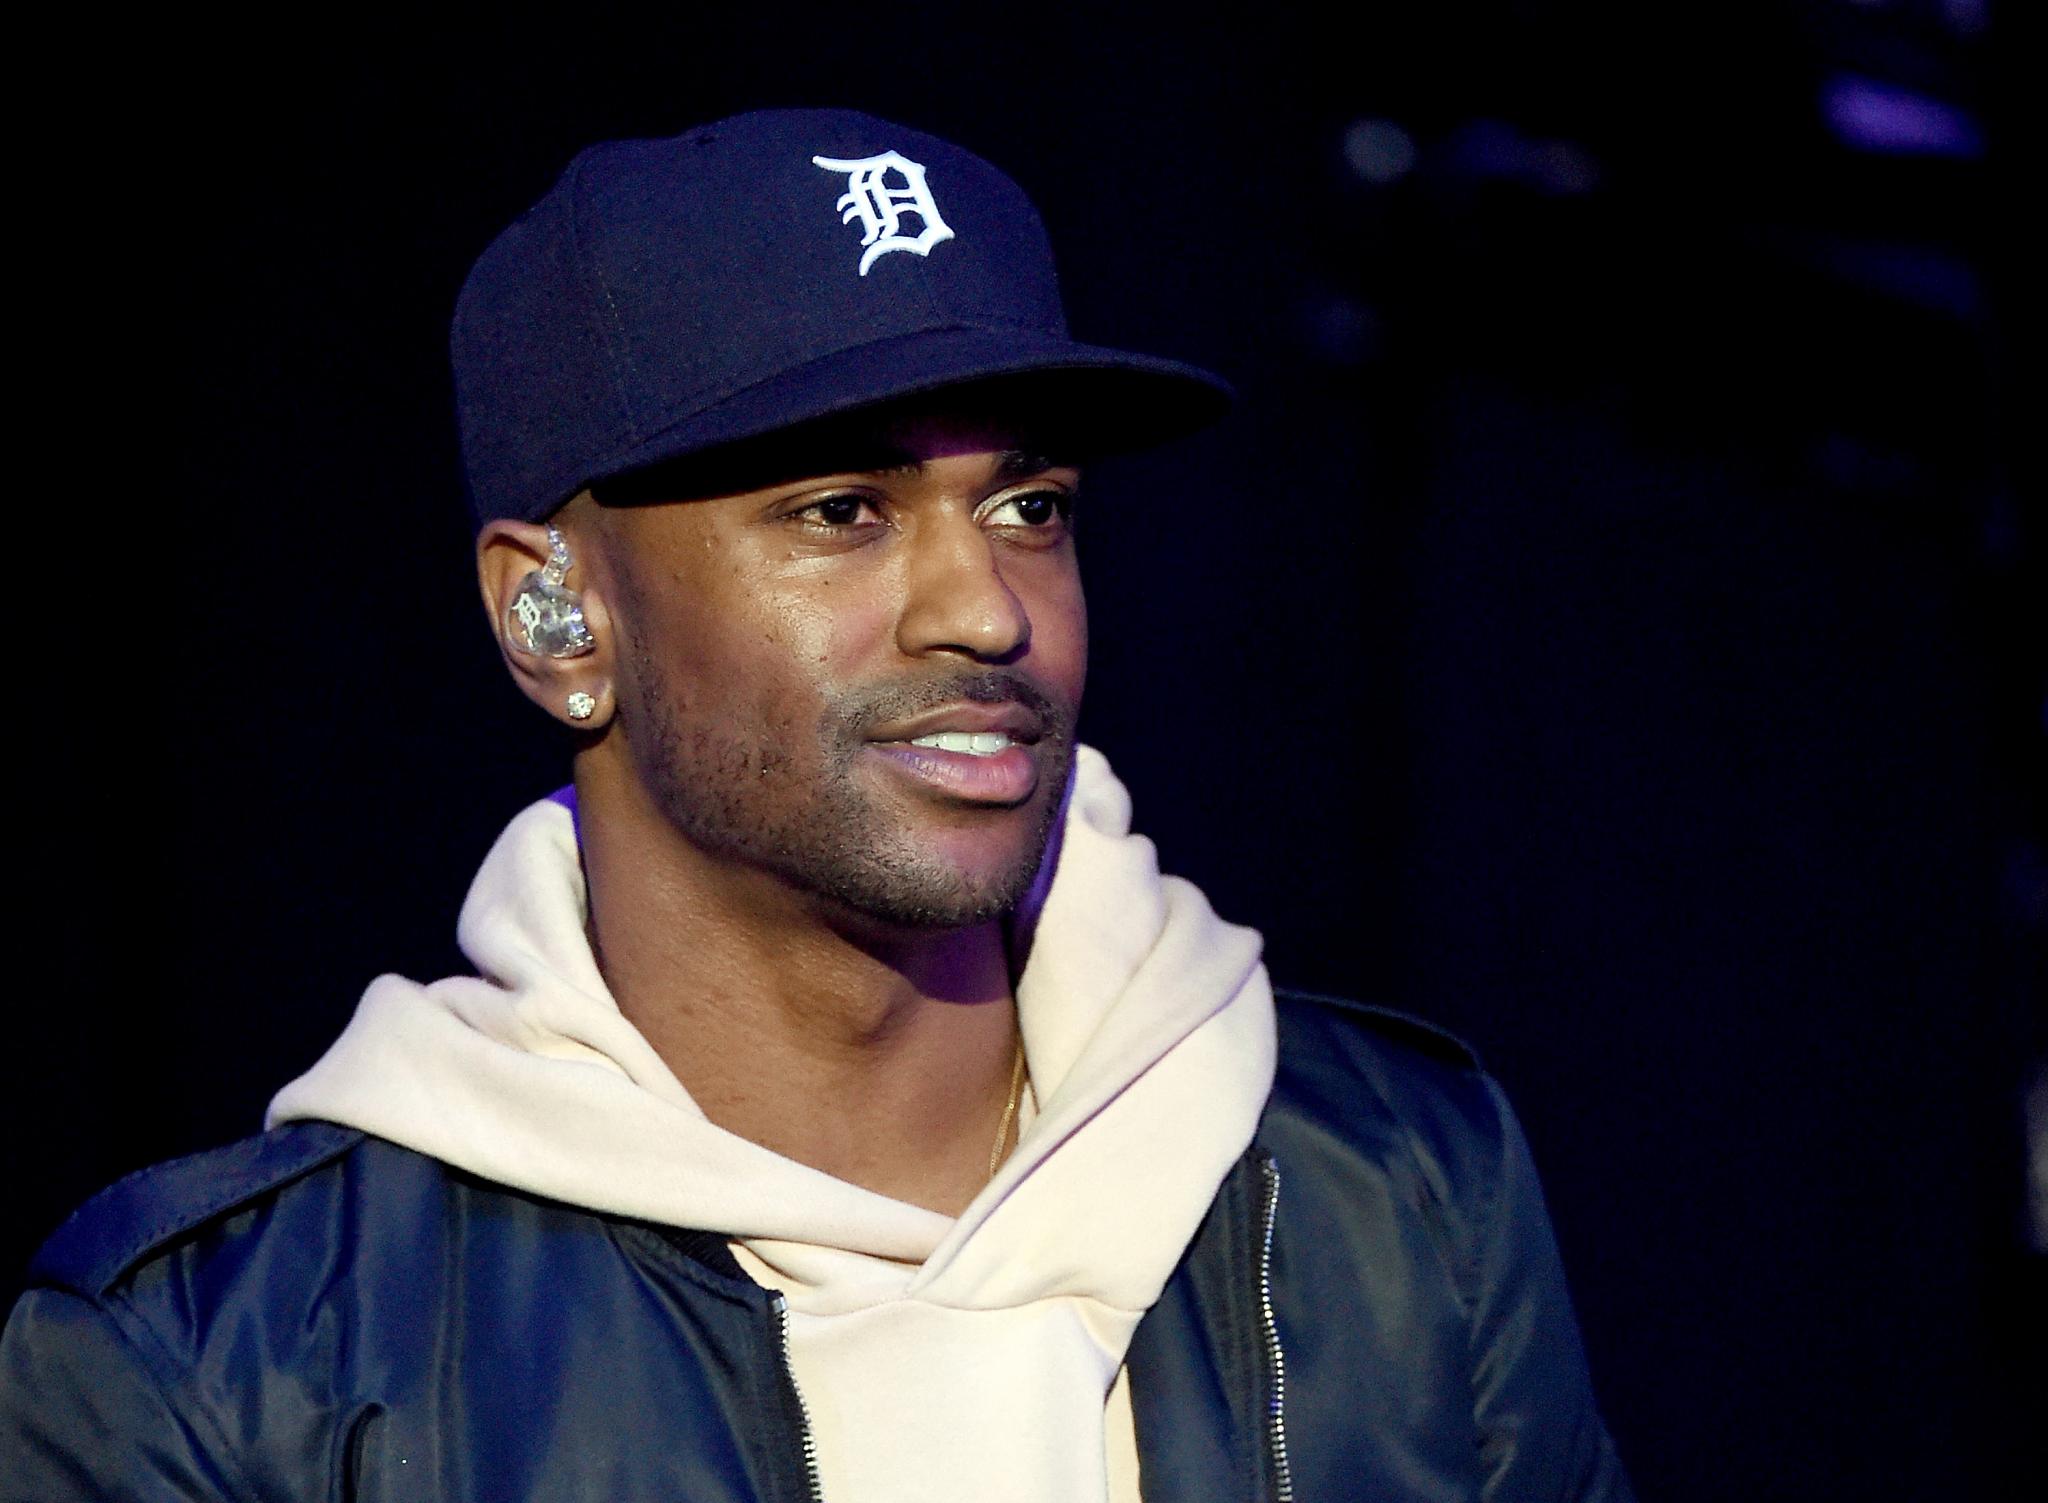 Big Sean On His Youth Charity: 'I've Got To Give Back, That's My Responsibility'